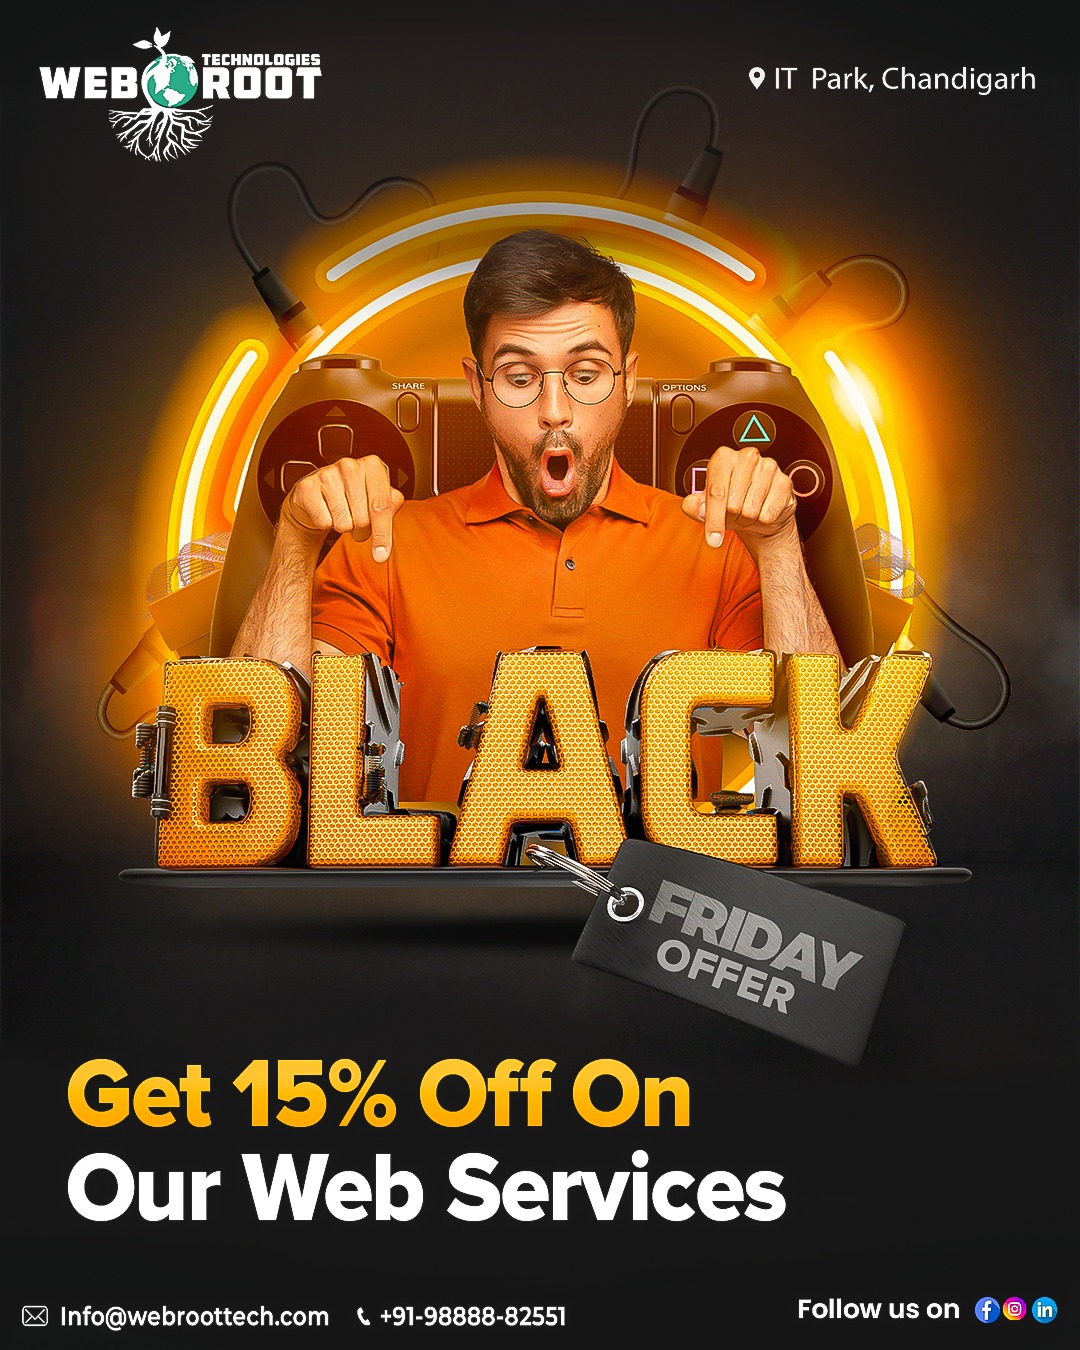 Now or Never Black Friday Deals!!
 
Take advantage of the most alluring offers we are now offering on all web services. Set apart your business from the rapidly expanding competition across industries. Whether it's SEO, social media optimization, Google advertisements, or social media marketing, get a discount of 15% and significantly increase sales and reach.

Get In Touch With Us:
https://webroottech.com/
📞: +91-9888882551
📧: info@webroottech.com

#blackfridaysale #discount #sale #blackfridaywebsite #blackfridaylogo #blackfriday #blackfridaysale #blackfriday2022 #blackfridaywebsitesale #blackfridaywebsitedesign #offer #webroottech #webdeveloper #blackfridayweekend #webdevelopment  #SEO #socialmedia #logodesigne #webdesigner #Facebookpost #Ranking #branding #Digitalmarketing #Marketingstrategies  #marketingdigital #chandigarhmarketing #VideoMarketing #socialmediamarketing